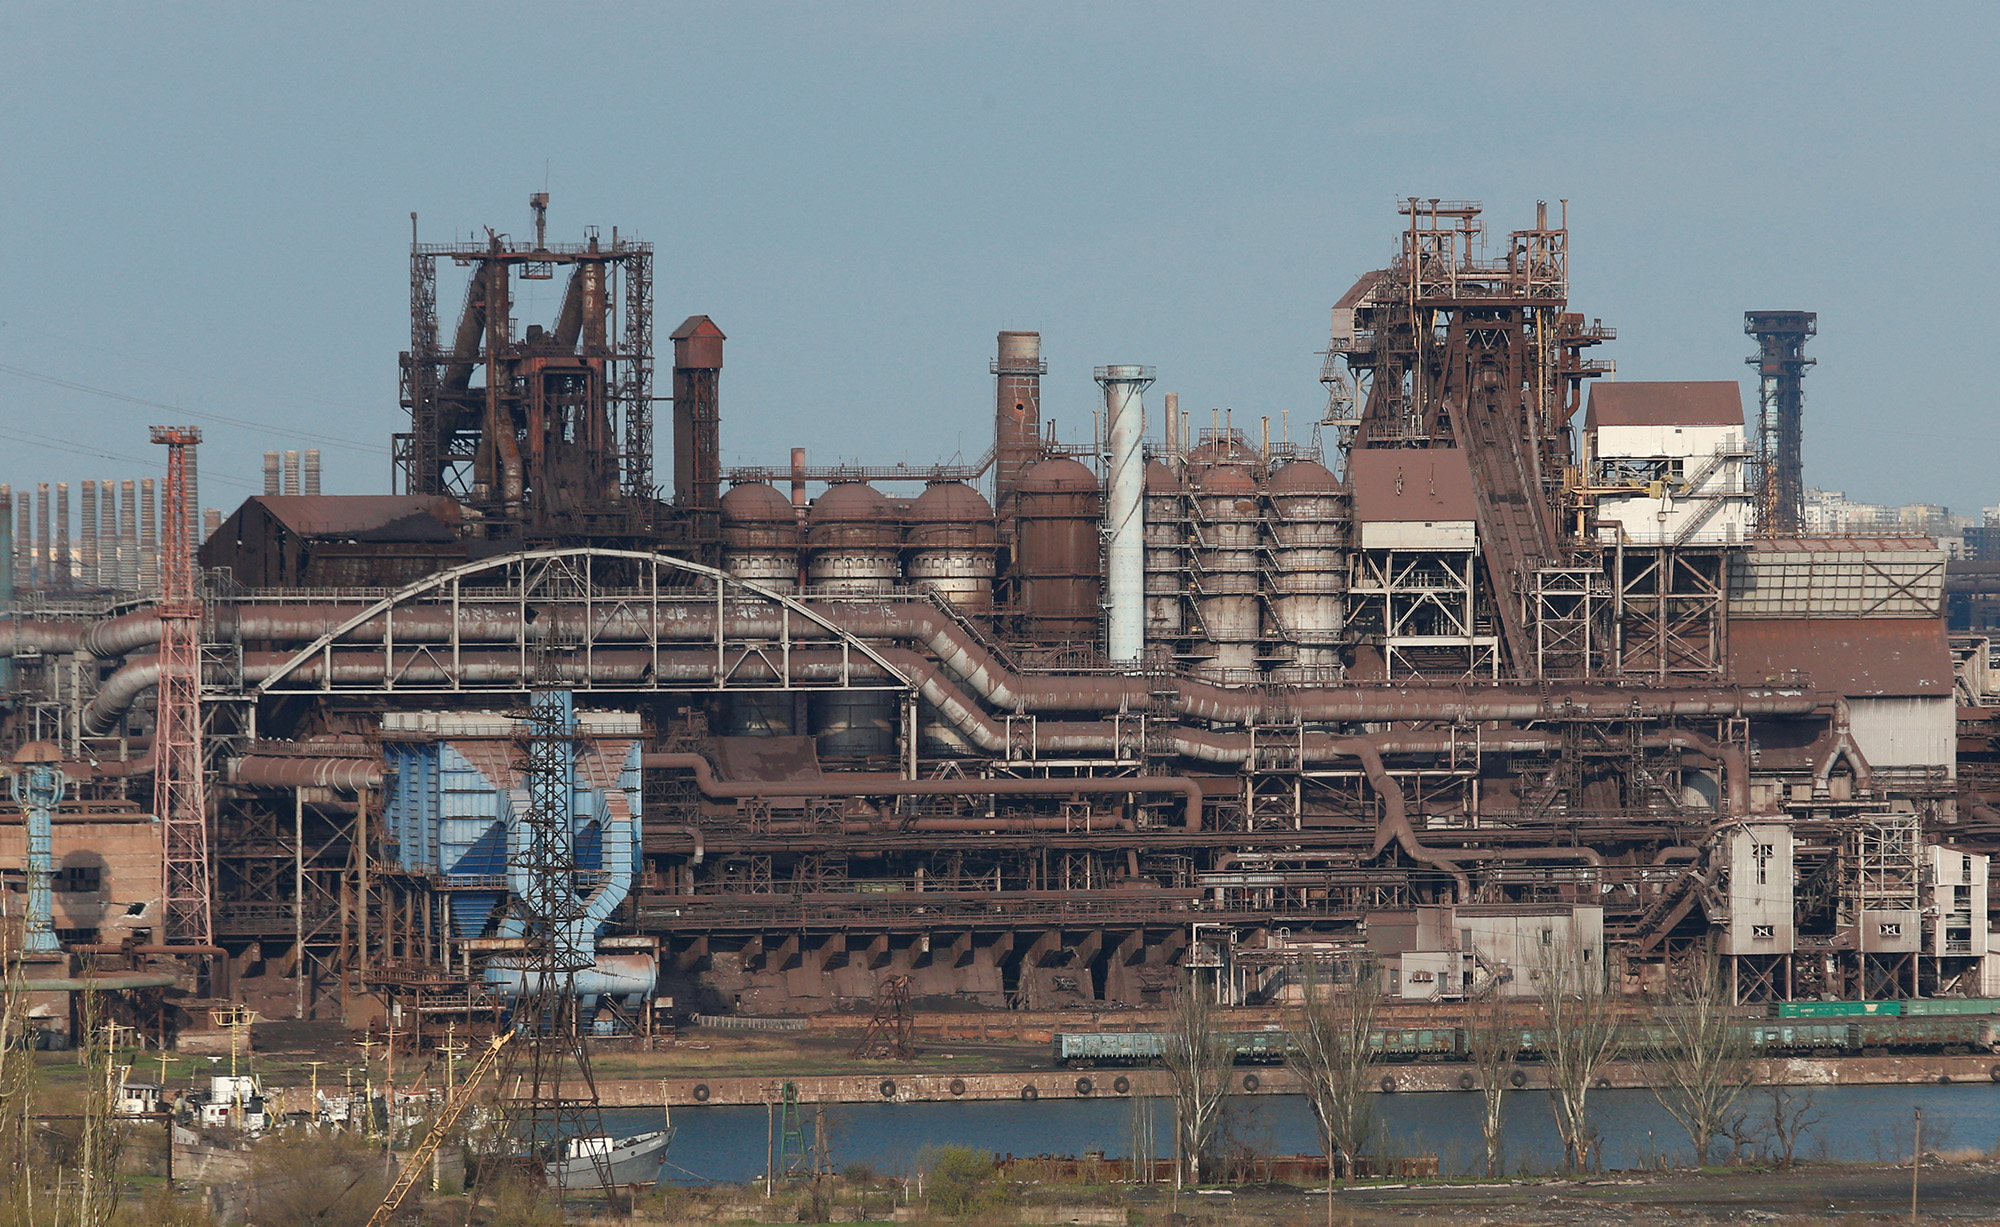 Azovstal Iron and Steel Works in the southern port city of Mariupol, Ukraine, on April 22.